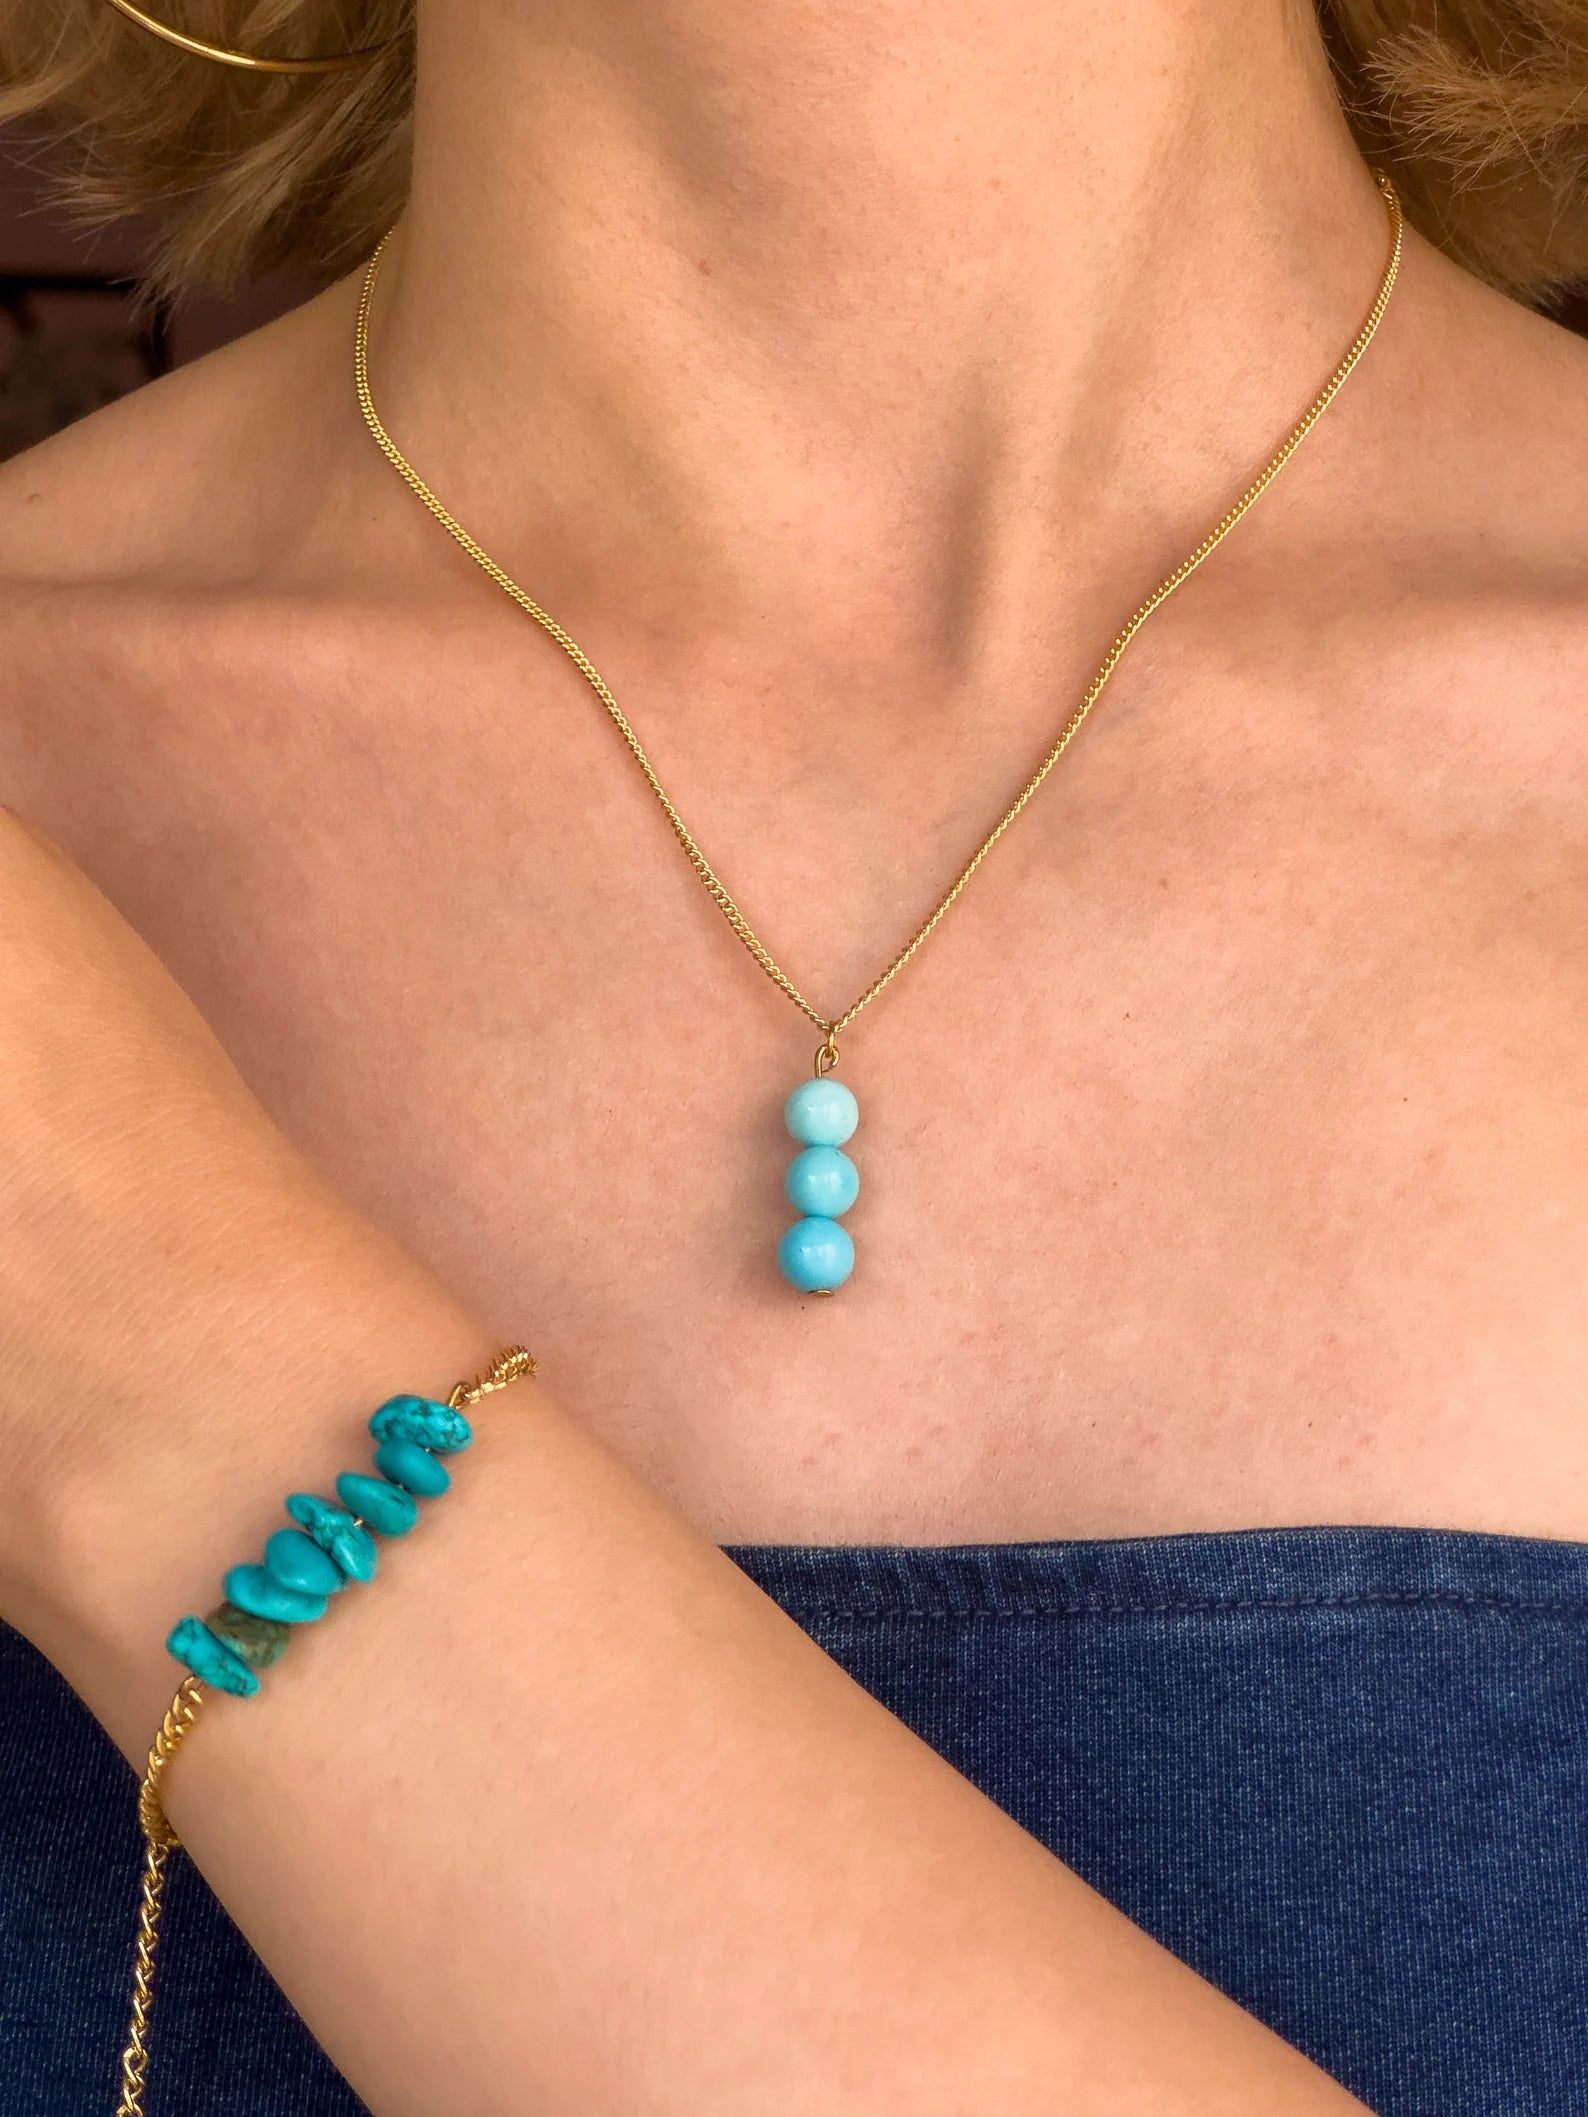 Minimalist Turquoise Necklace necklaces LUNARITY GARAGE 16 Inches  